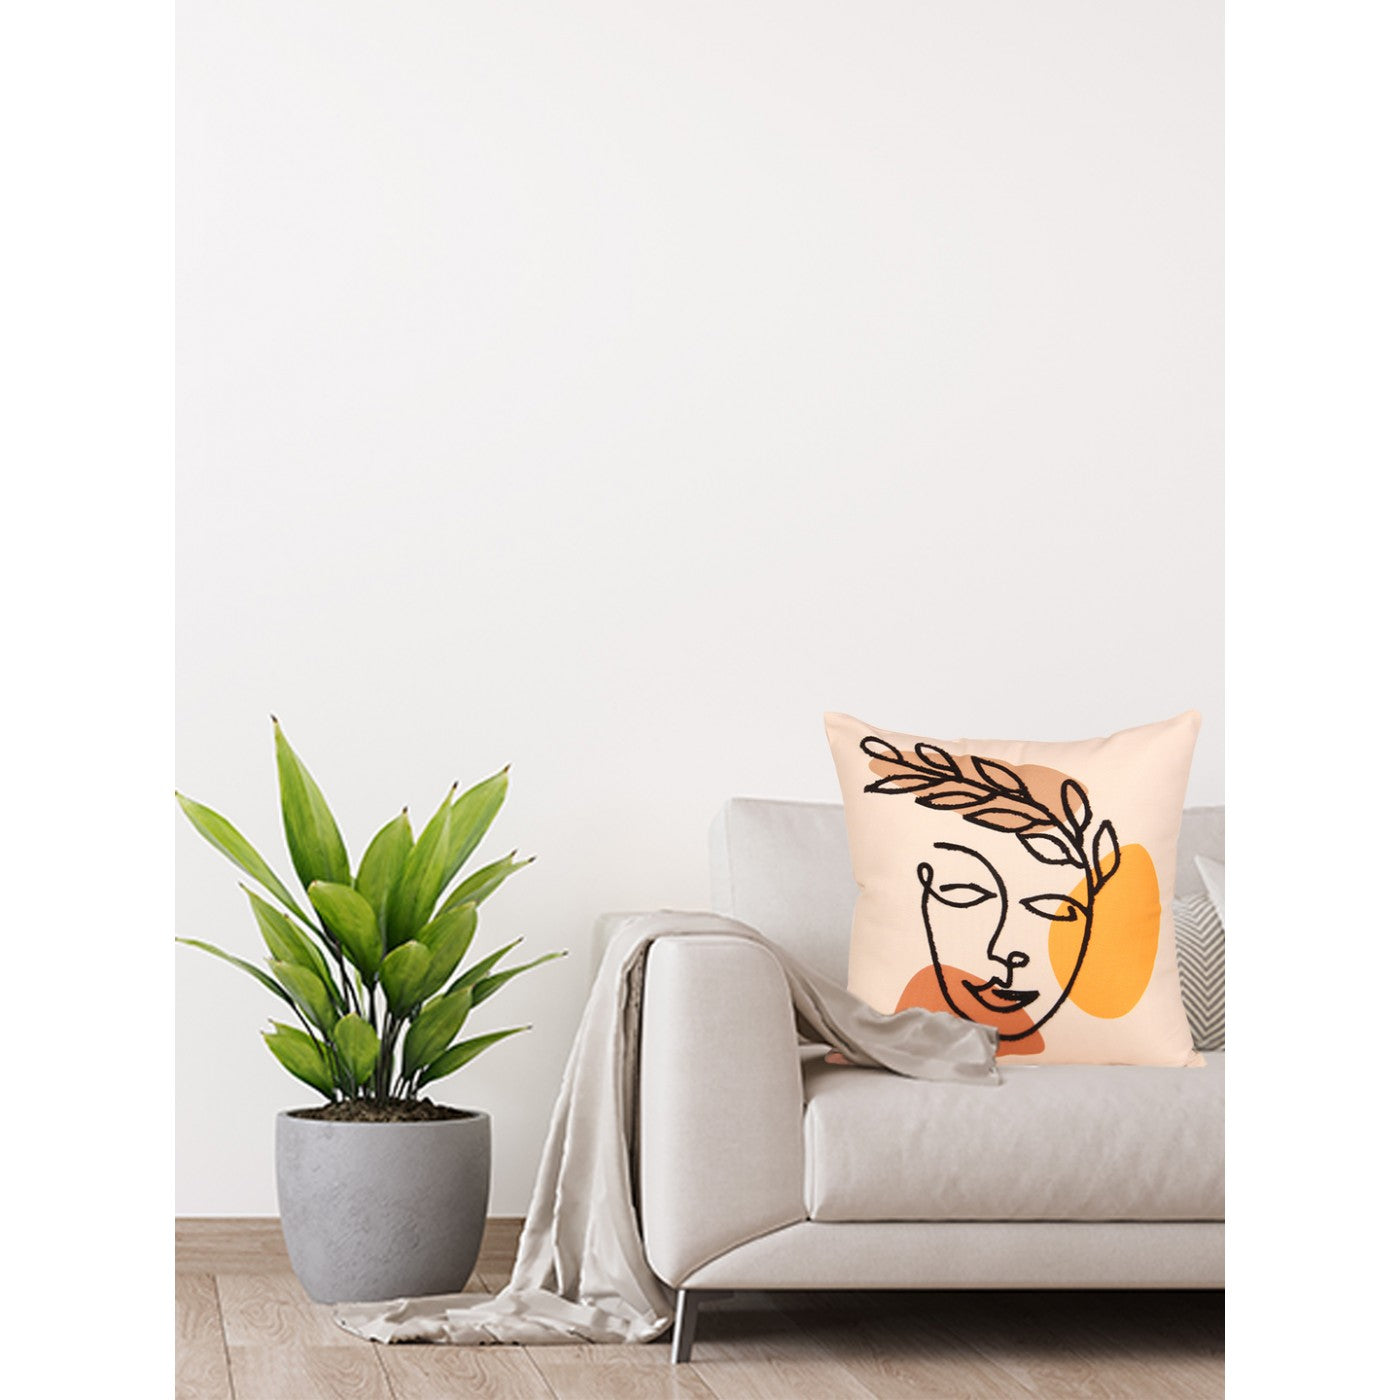 16x16 Inch Cushion Cover with Embroidered Face Art Print